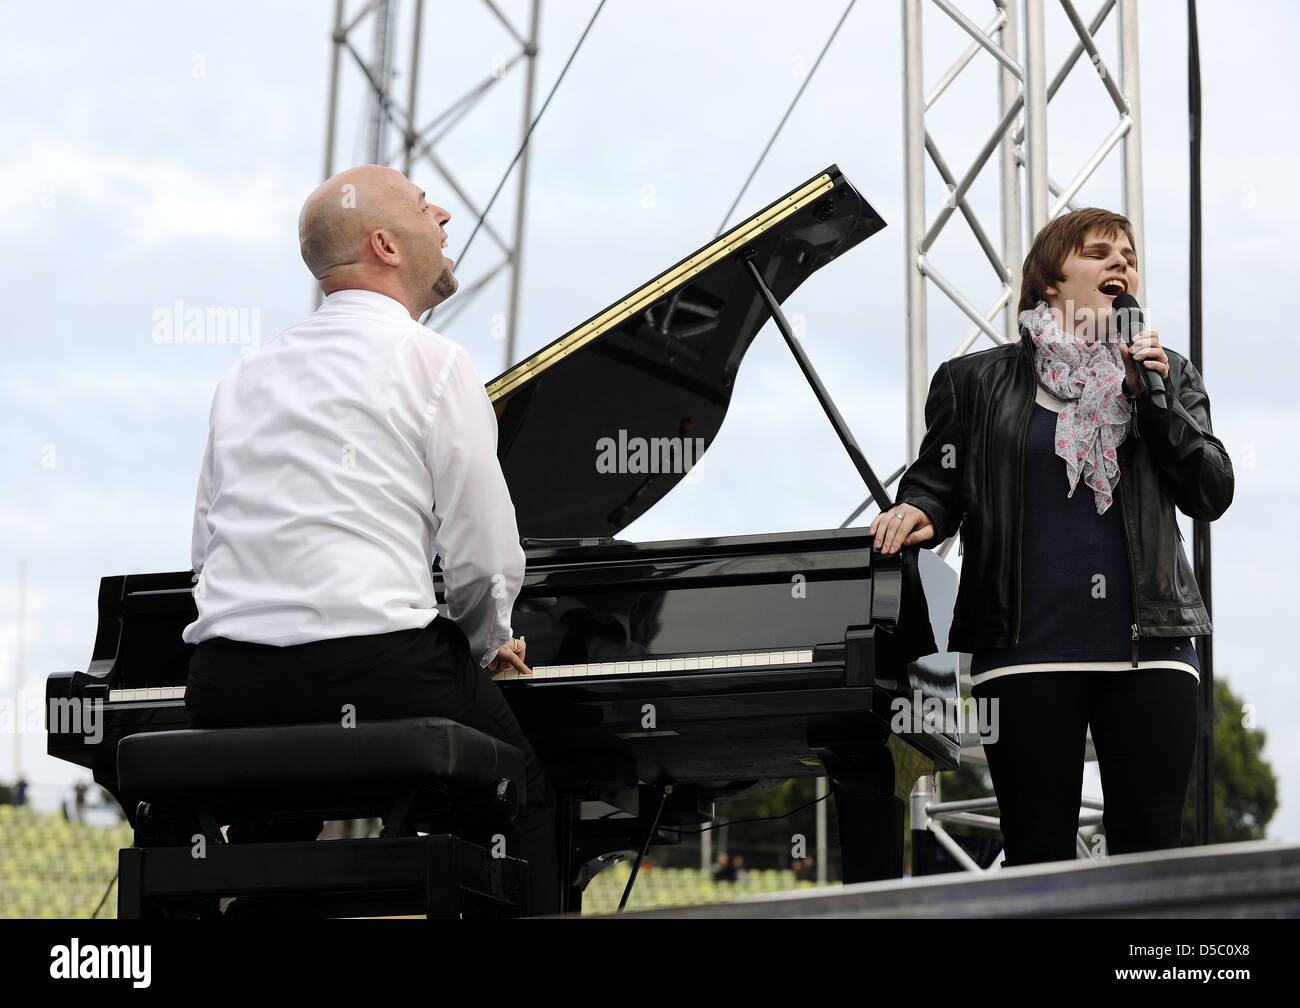 Der Graf of Unheilig and Sarah Pisek performing at a concert at Olympiapark. Munich, Germany - 23.07.2011. Marcella Stock Photo